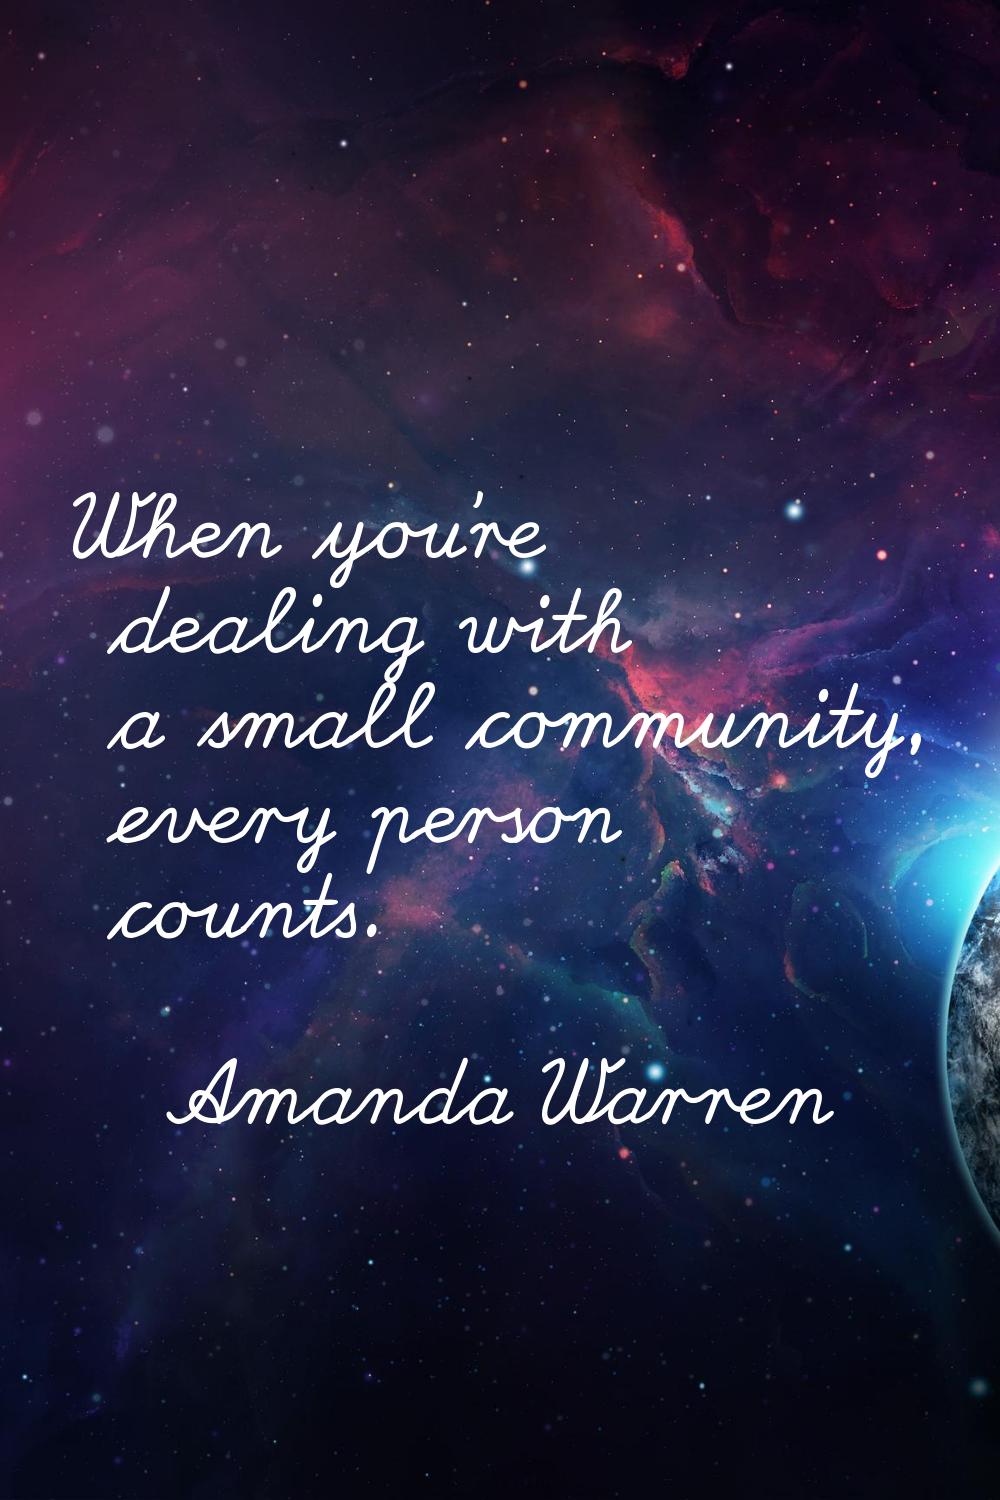 When you're dealing with a small community, every person counts.